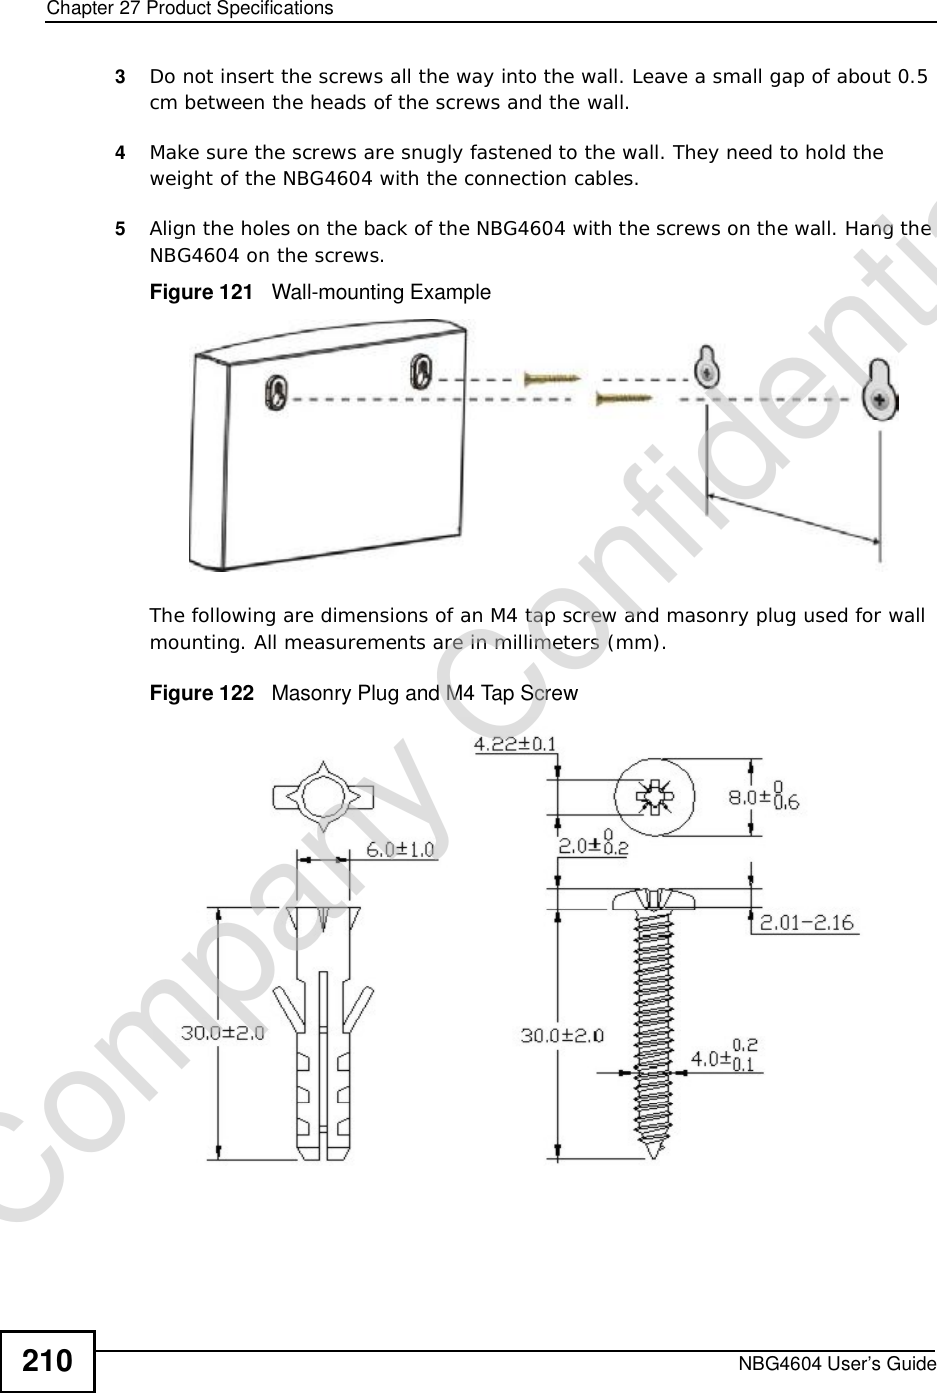 Chapter 27Product SpecificationsNBG4604 User’s Guide2103Do not insert the screws all the way into the wall. Leave a small gap of about 0.5 cm between the heads of the screws and the wall. 4Make sure the screws are snugly fastened to the wall. They need to hold the weight of the NBG4604 with the connection cables. 5Align the holes on the back of the NBG4604 with the screws on the wall. Hang the NBG4604 on the screws.Figure 121   Wall-mounting ExampleThe following are dimensions of an M4 tap screw and masonry plug used for wall mounting. All measurements are in millimeters (mm). Figure 122   Masonry Plug and M4 Tap ScrewCompany Confidential